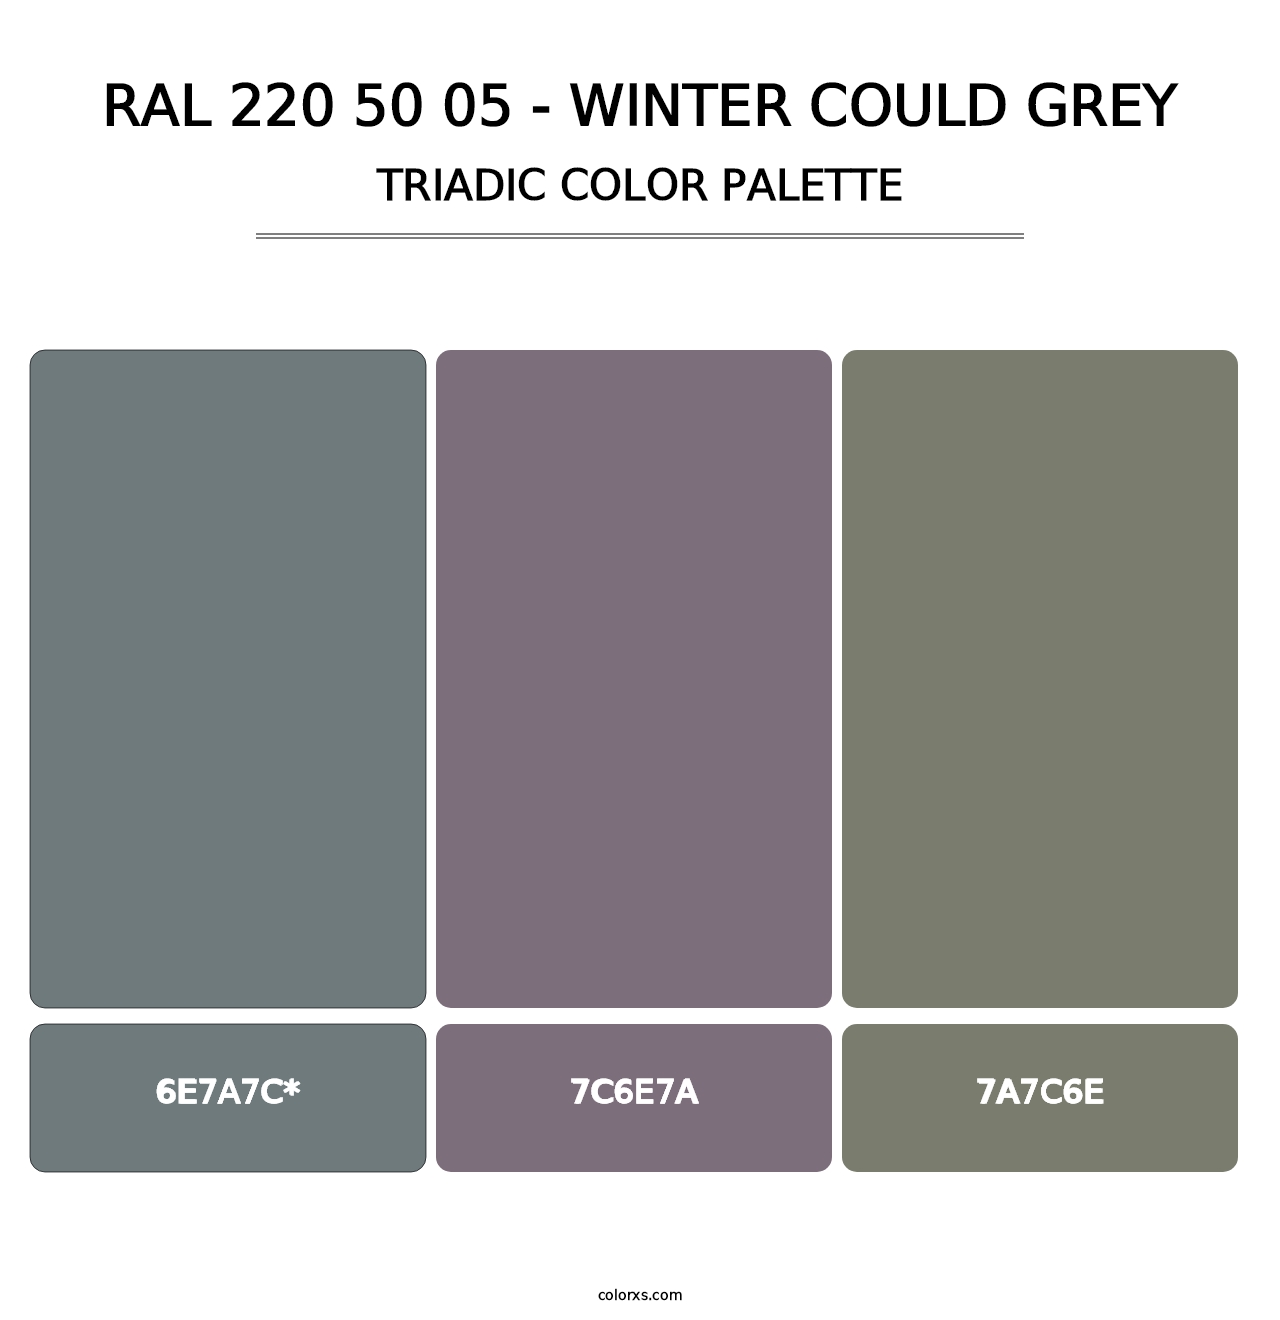 RAL 220 50 05 - Winter Could Grey - Triadic Color Palette